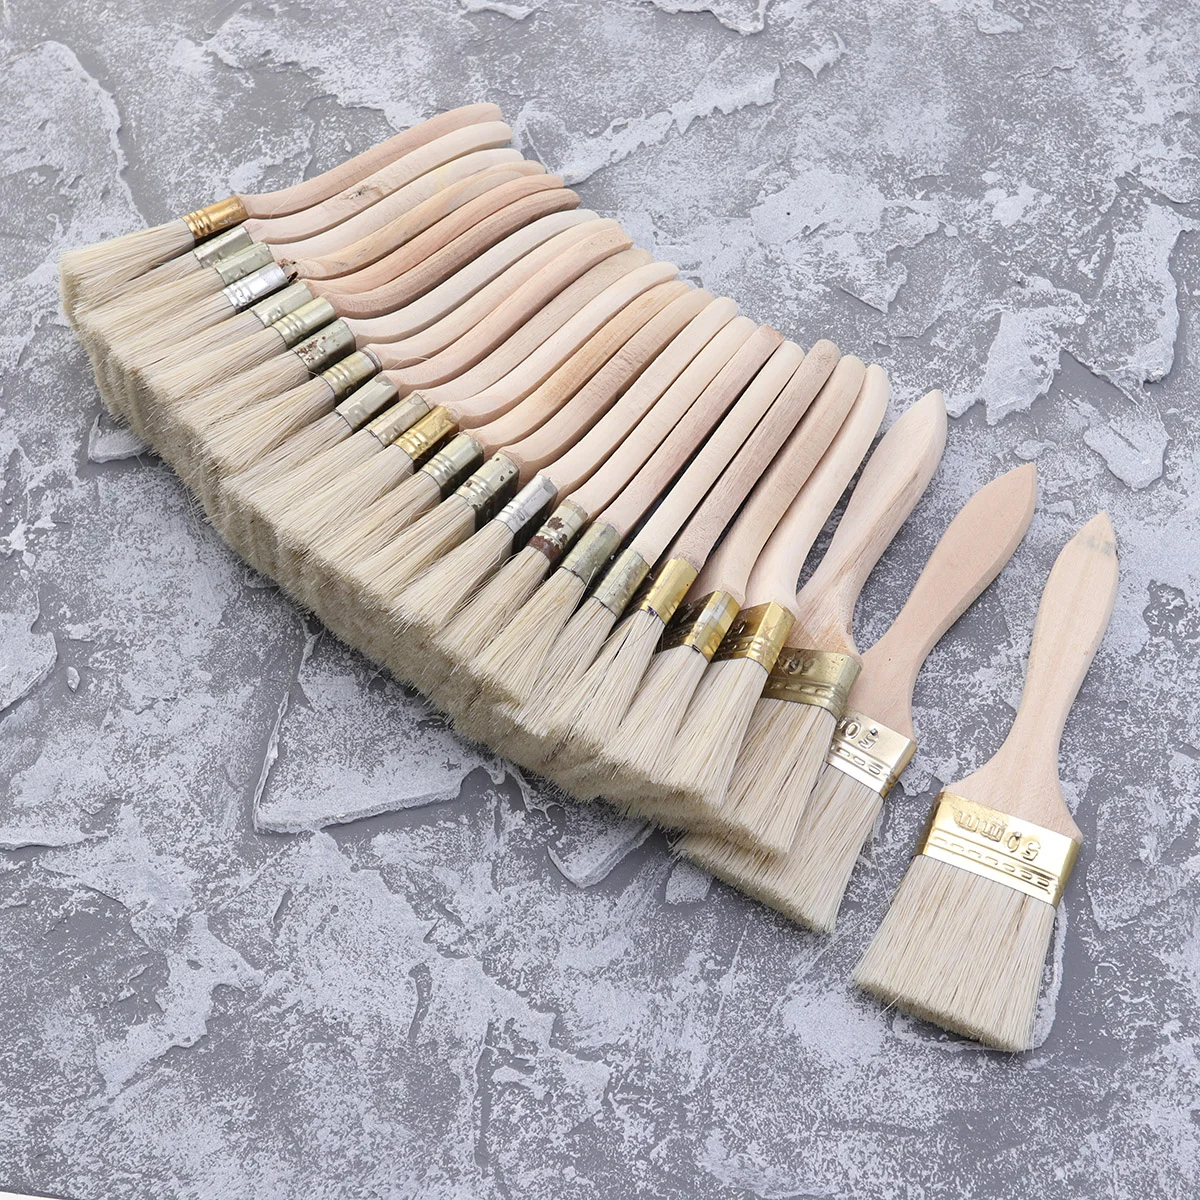 

23pcs brush brushes for walls set paintbrushes- Brushes Wooden Handle Premium Durable Painting Tool for Wall Furniture Home